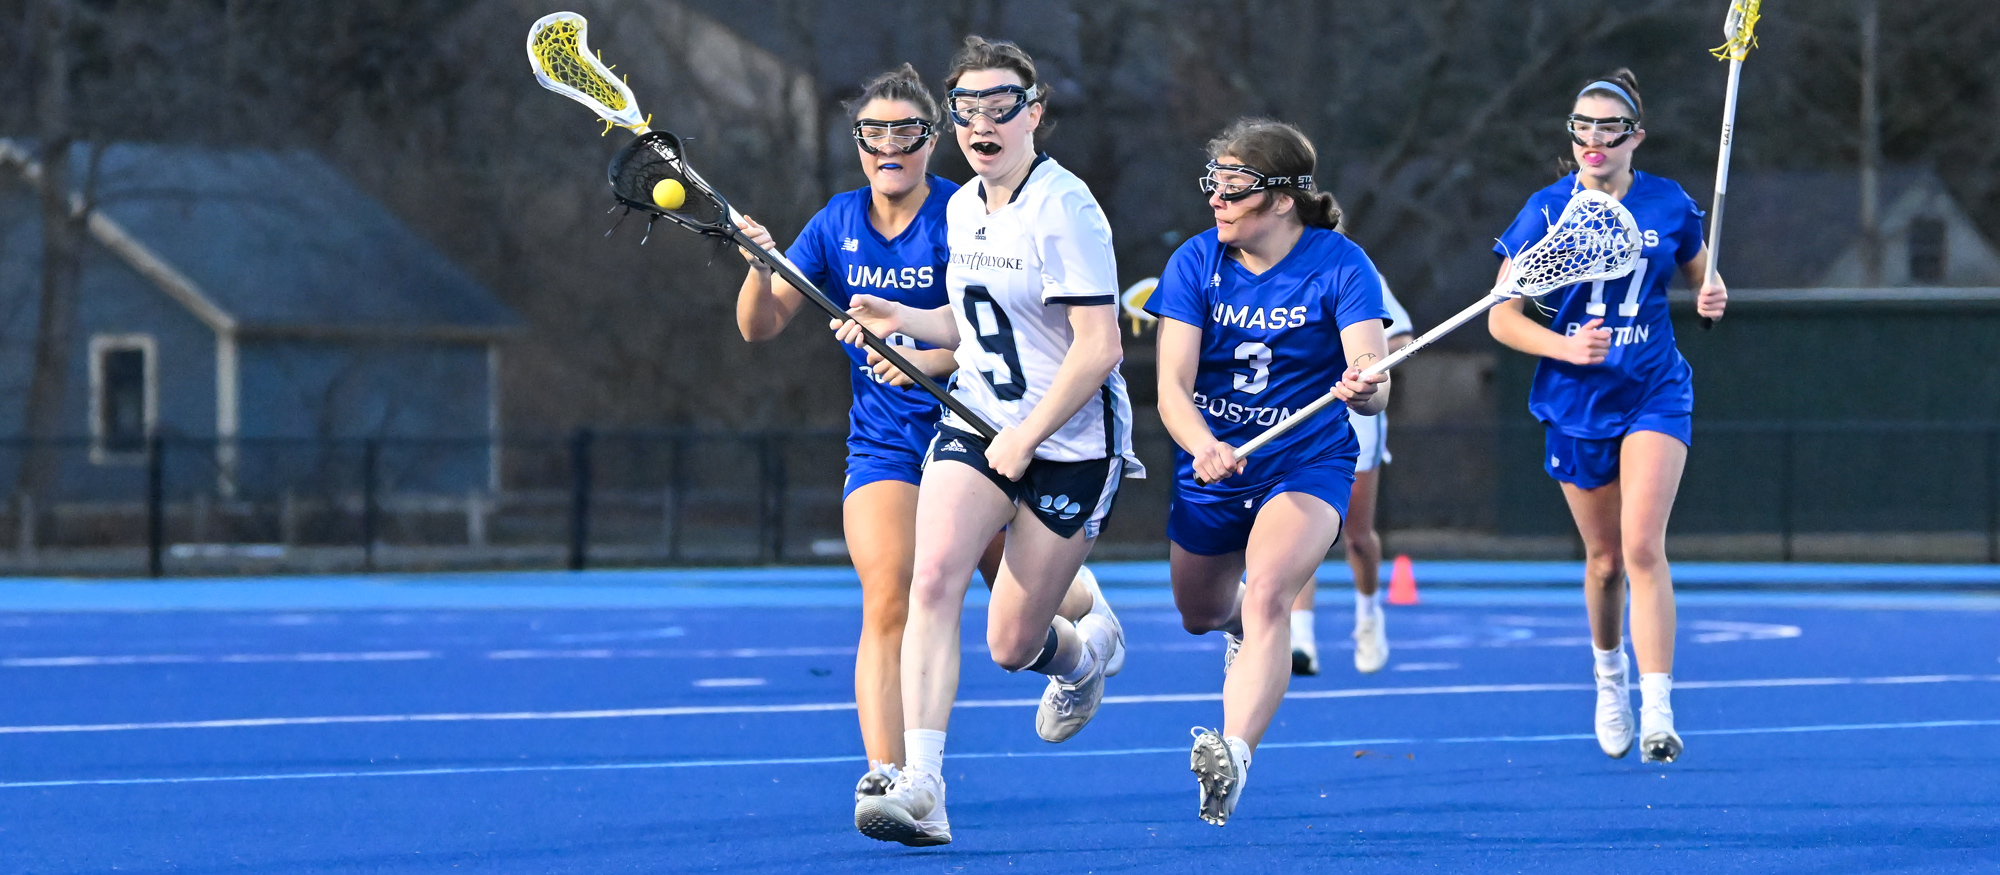 Ella Phillips scored two goals and added an assist in Mount Holyoke's 21-11 loss to Wheaton on March 30, 2024. (RJB Sports file photo)